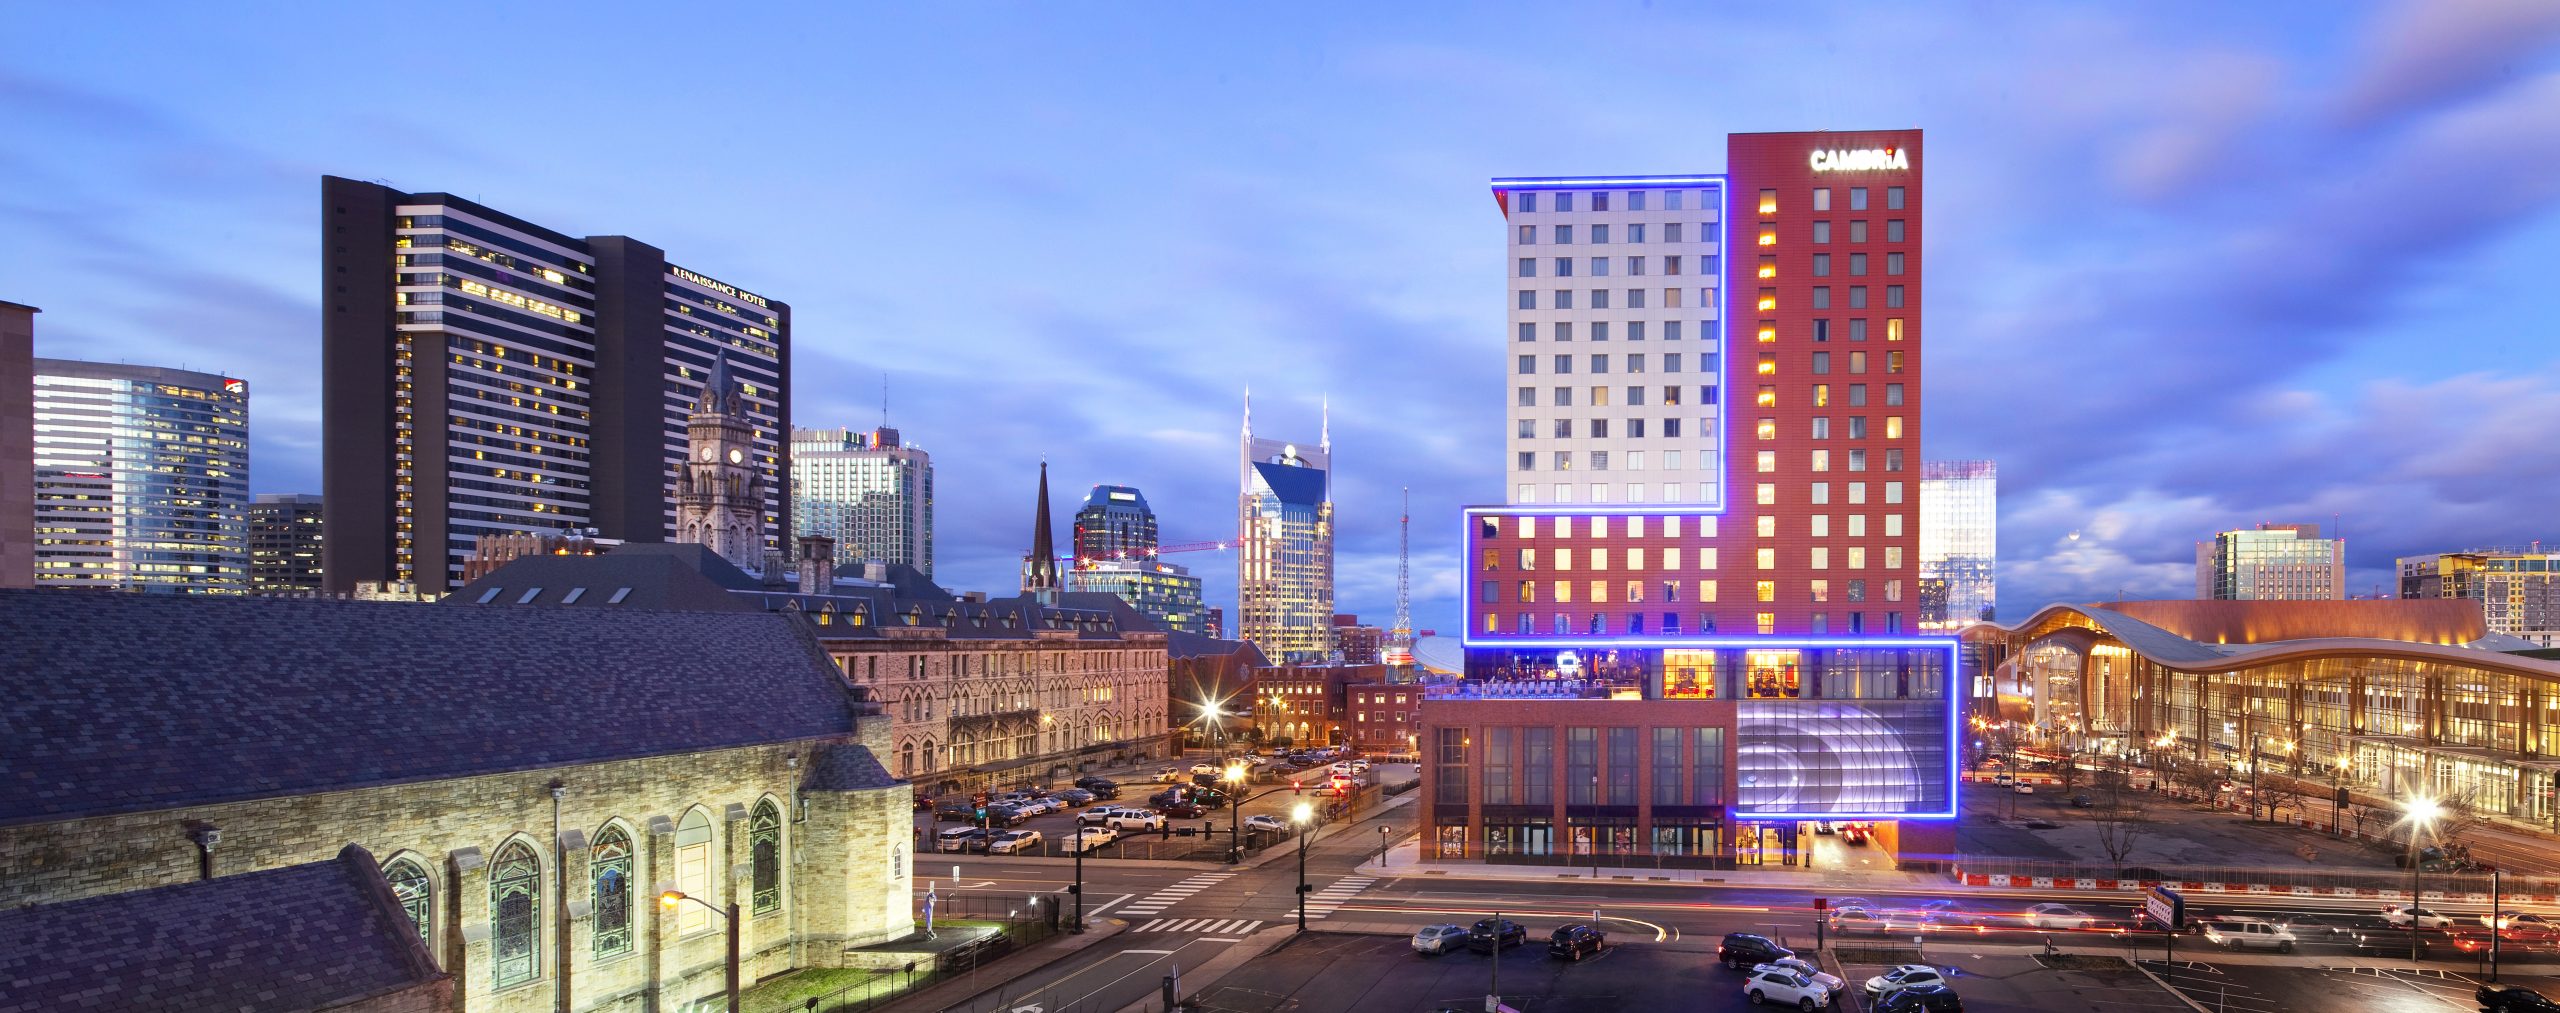 Cambria Hotel Nashville, Cambria Hotel New Orleans and The Fold House win a combined four awards at the AIA Baton Rouge Rose Awards Gala